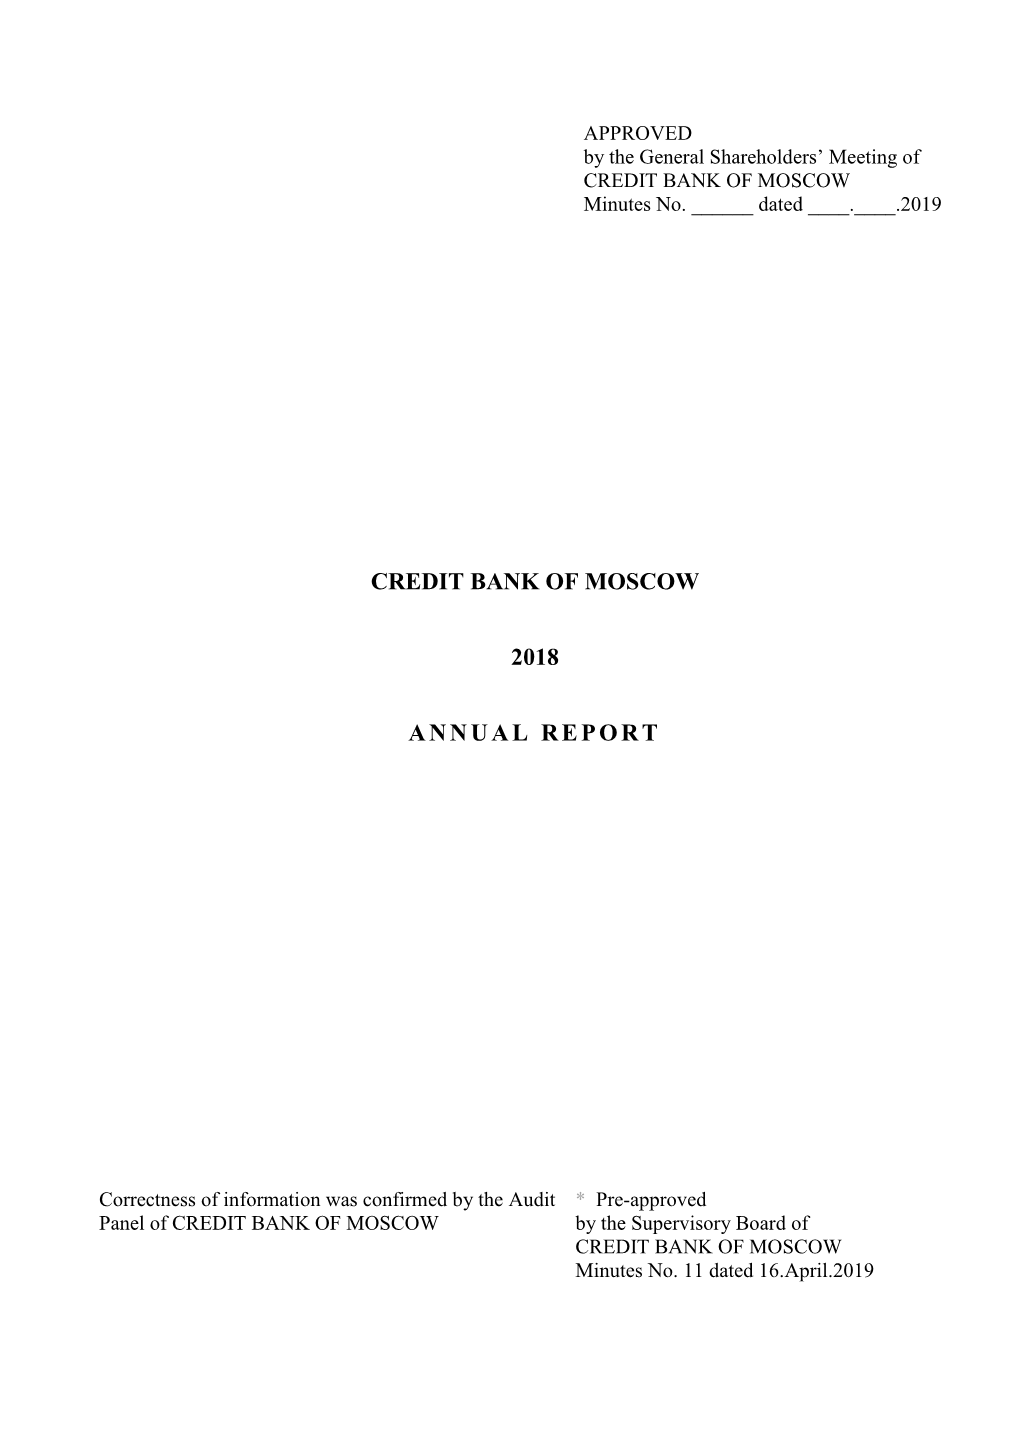 Credit Bank of Moscow 2018 Annual Report